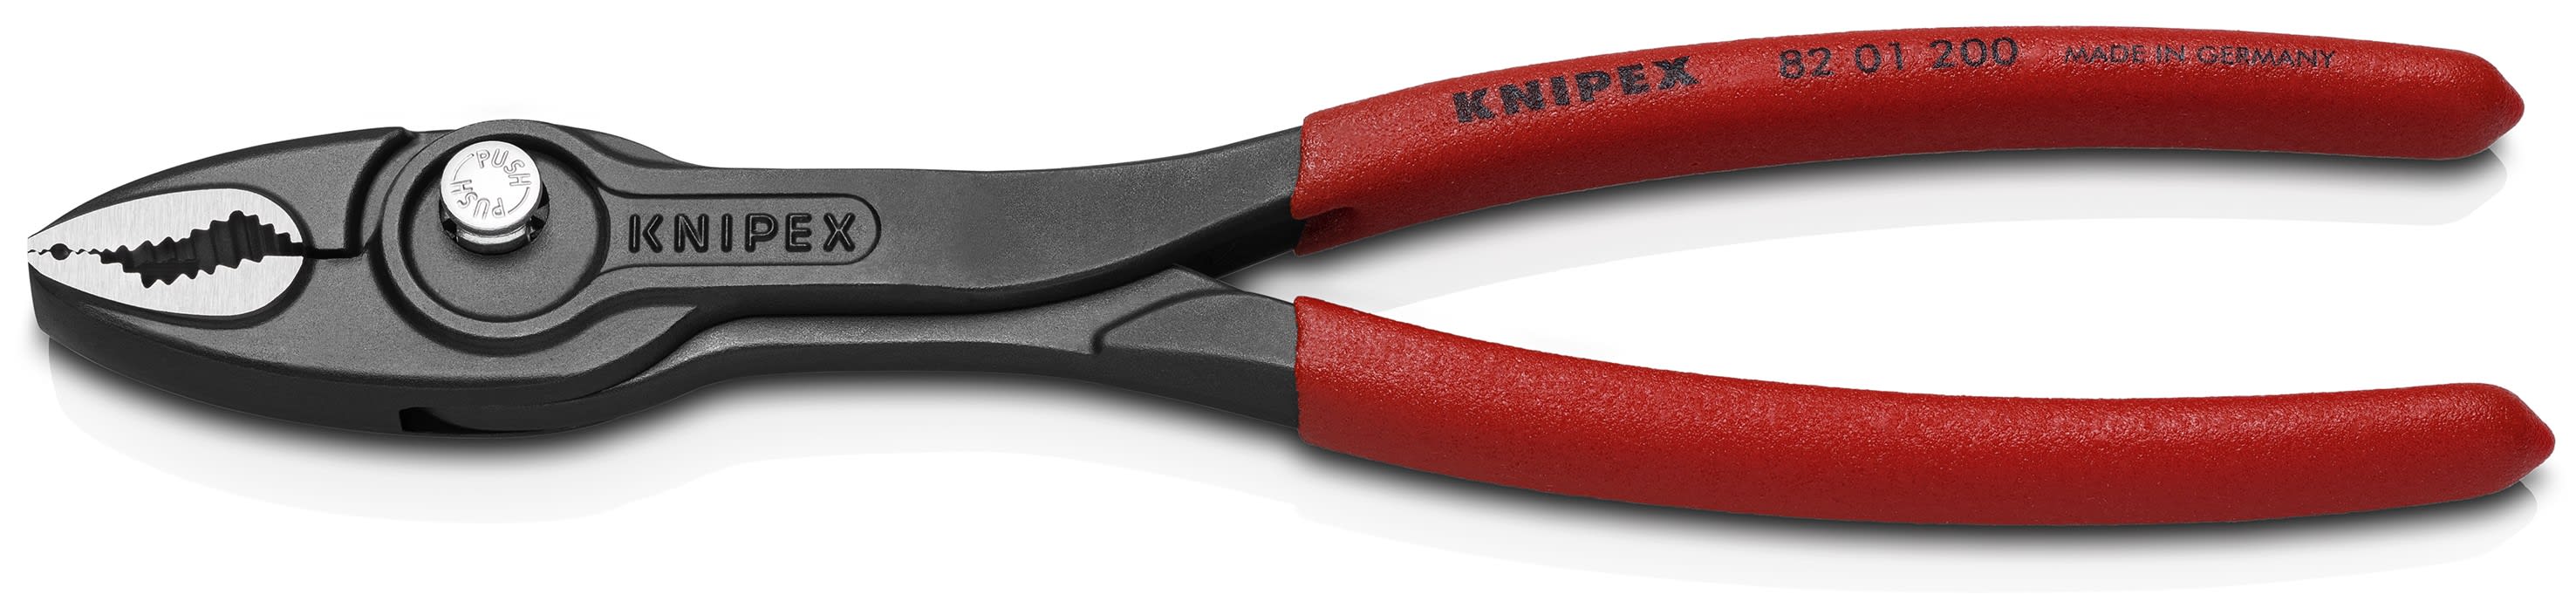 KNIPEX - Pince multiprise frontale et laterale Twingrip 200mm - Gainage PVC - Tete polie